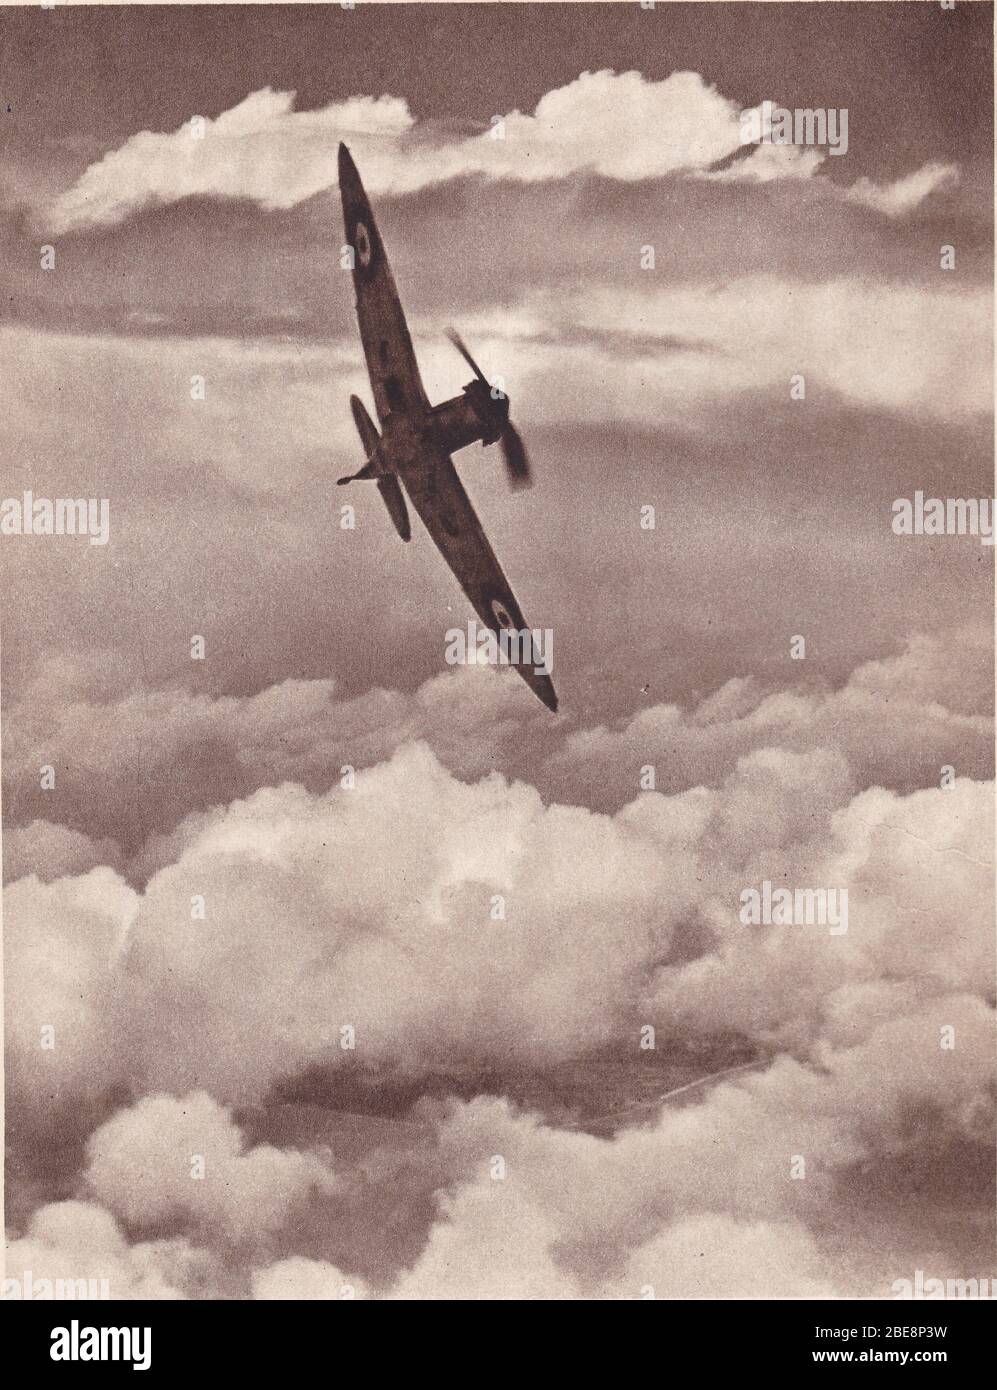 Vintage 1930s black and white photo of The Supermarine Spitfire plane in flight. Stock Photo